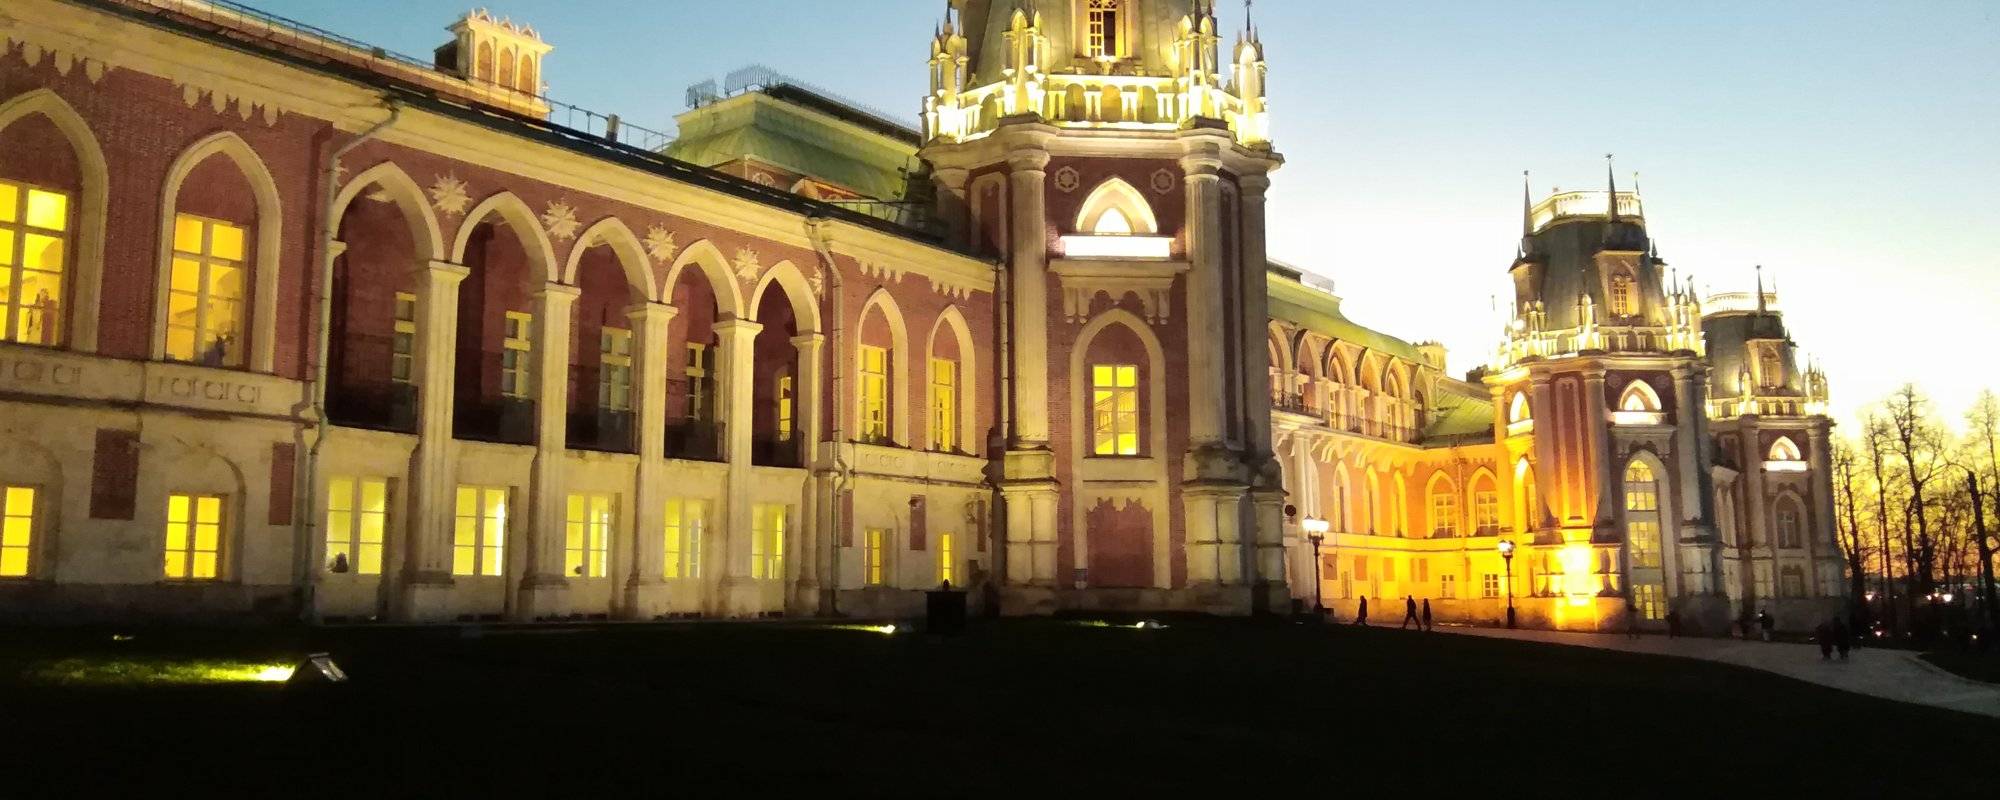 4th #Ulog: One day in Tsaritsyno park in Moscow, Russia.